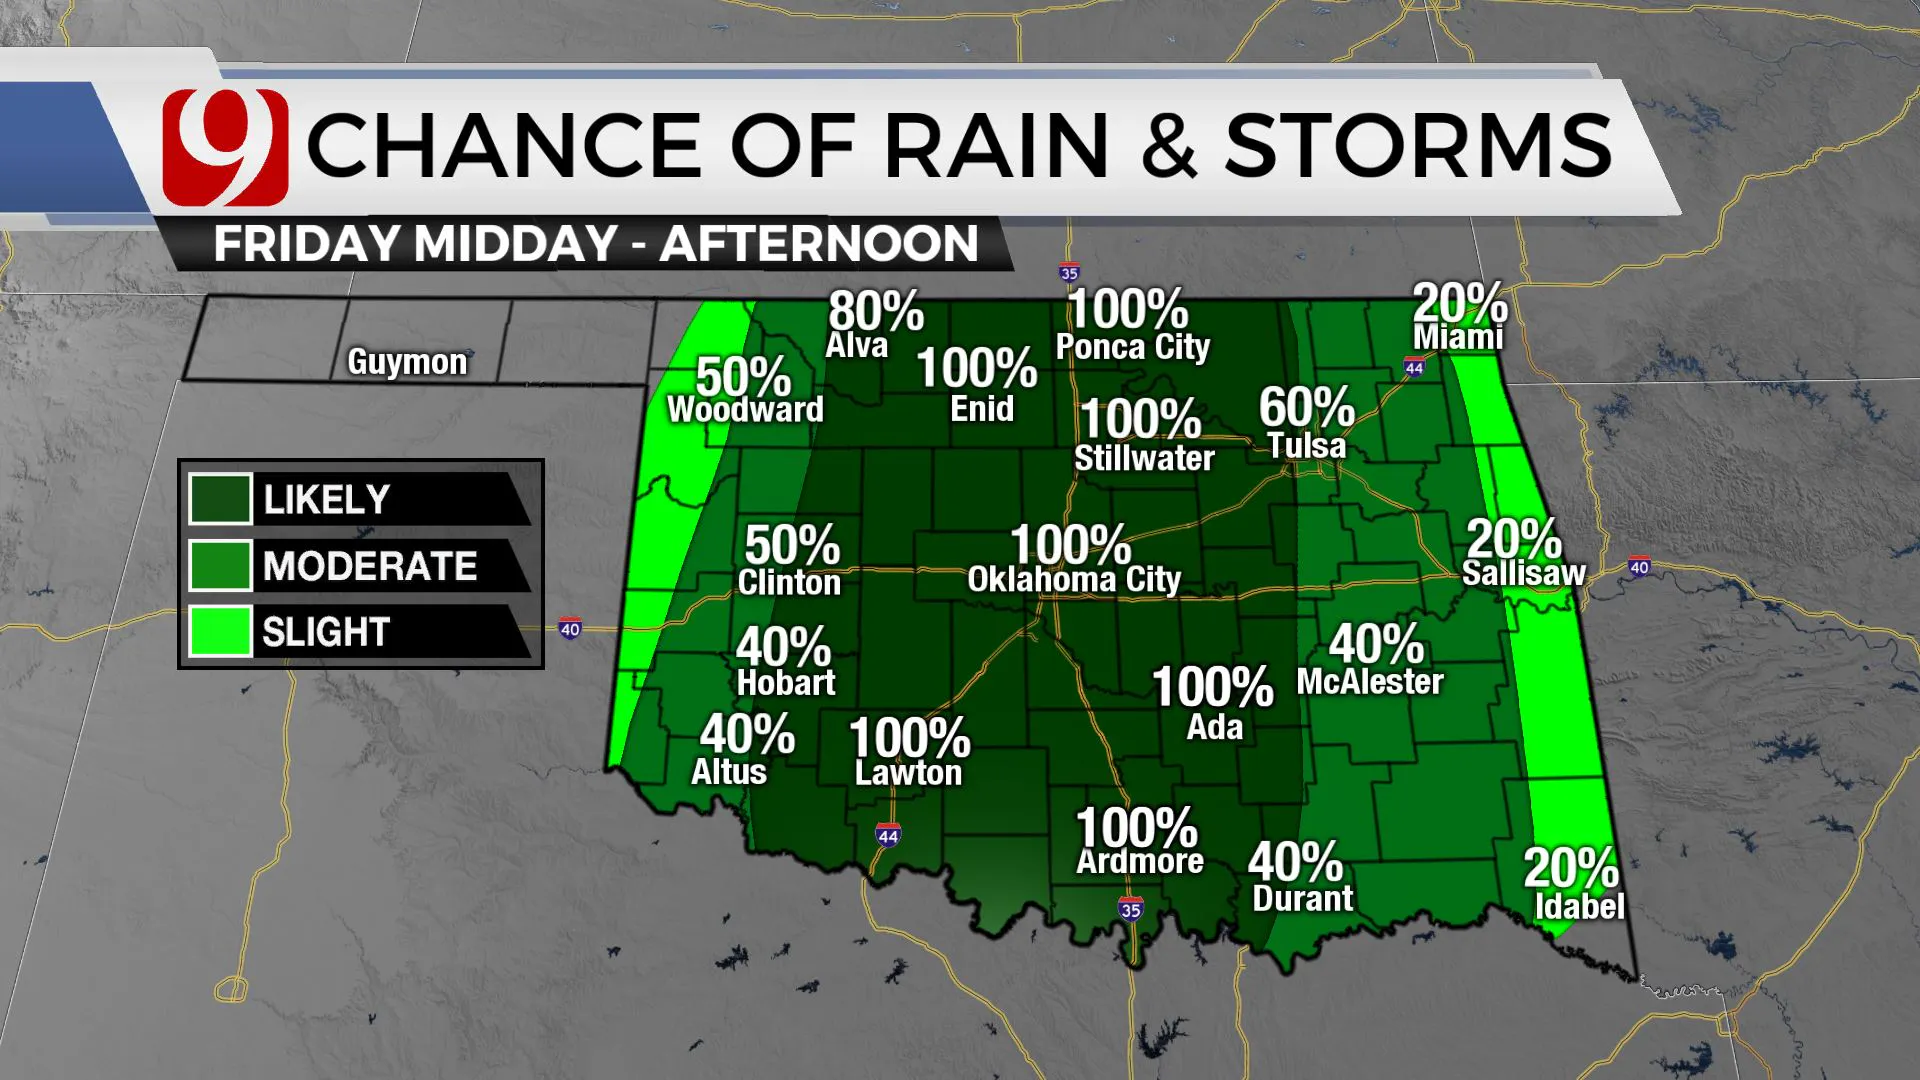 Chances of rain and storms on Friday.